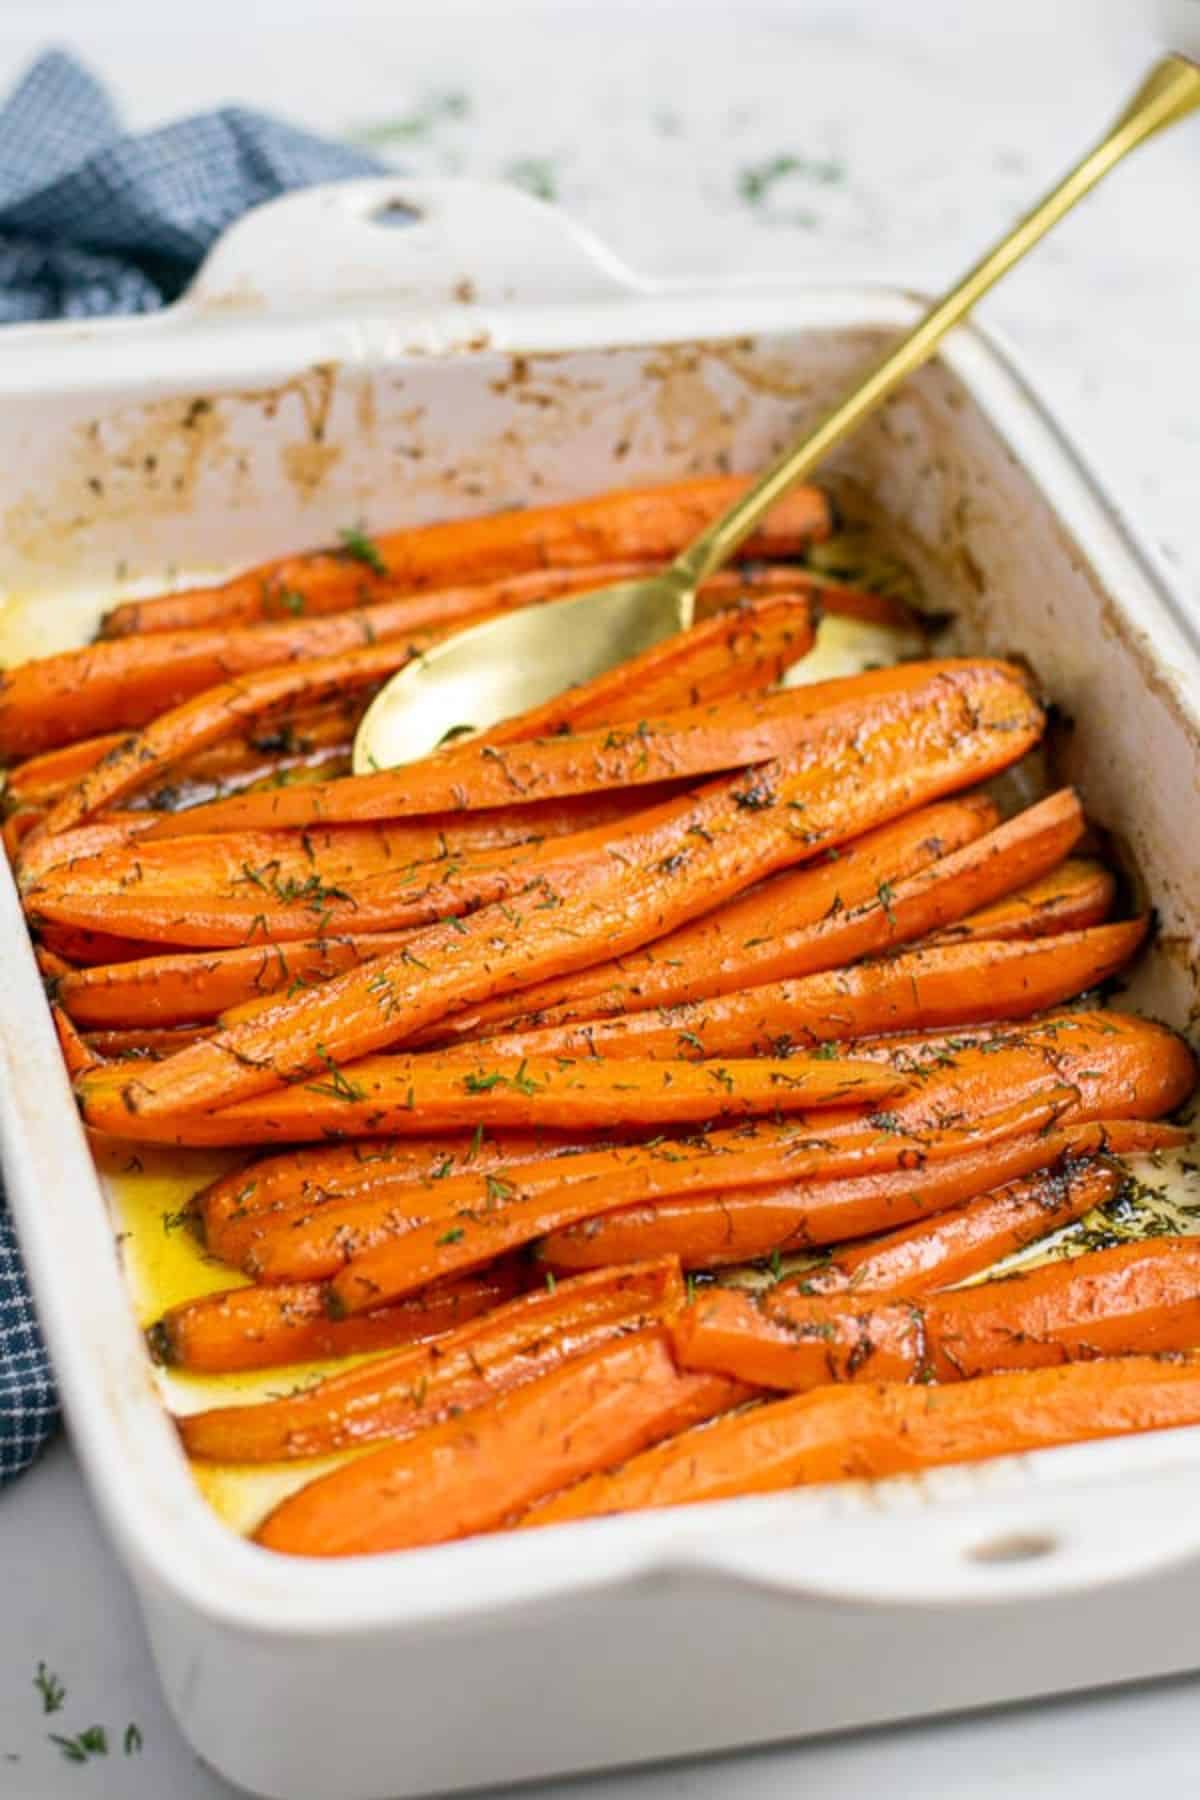 Dill and Garlic Roasted Carrots in a white casserole with a spoon.